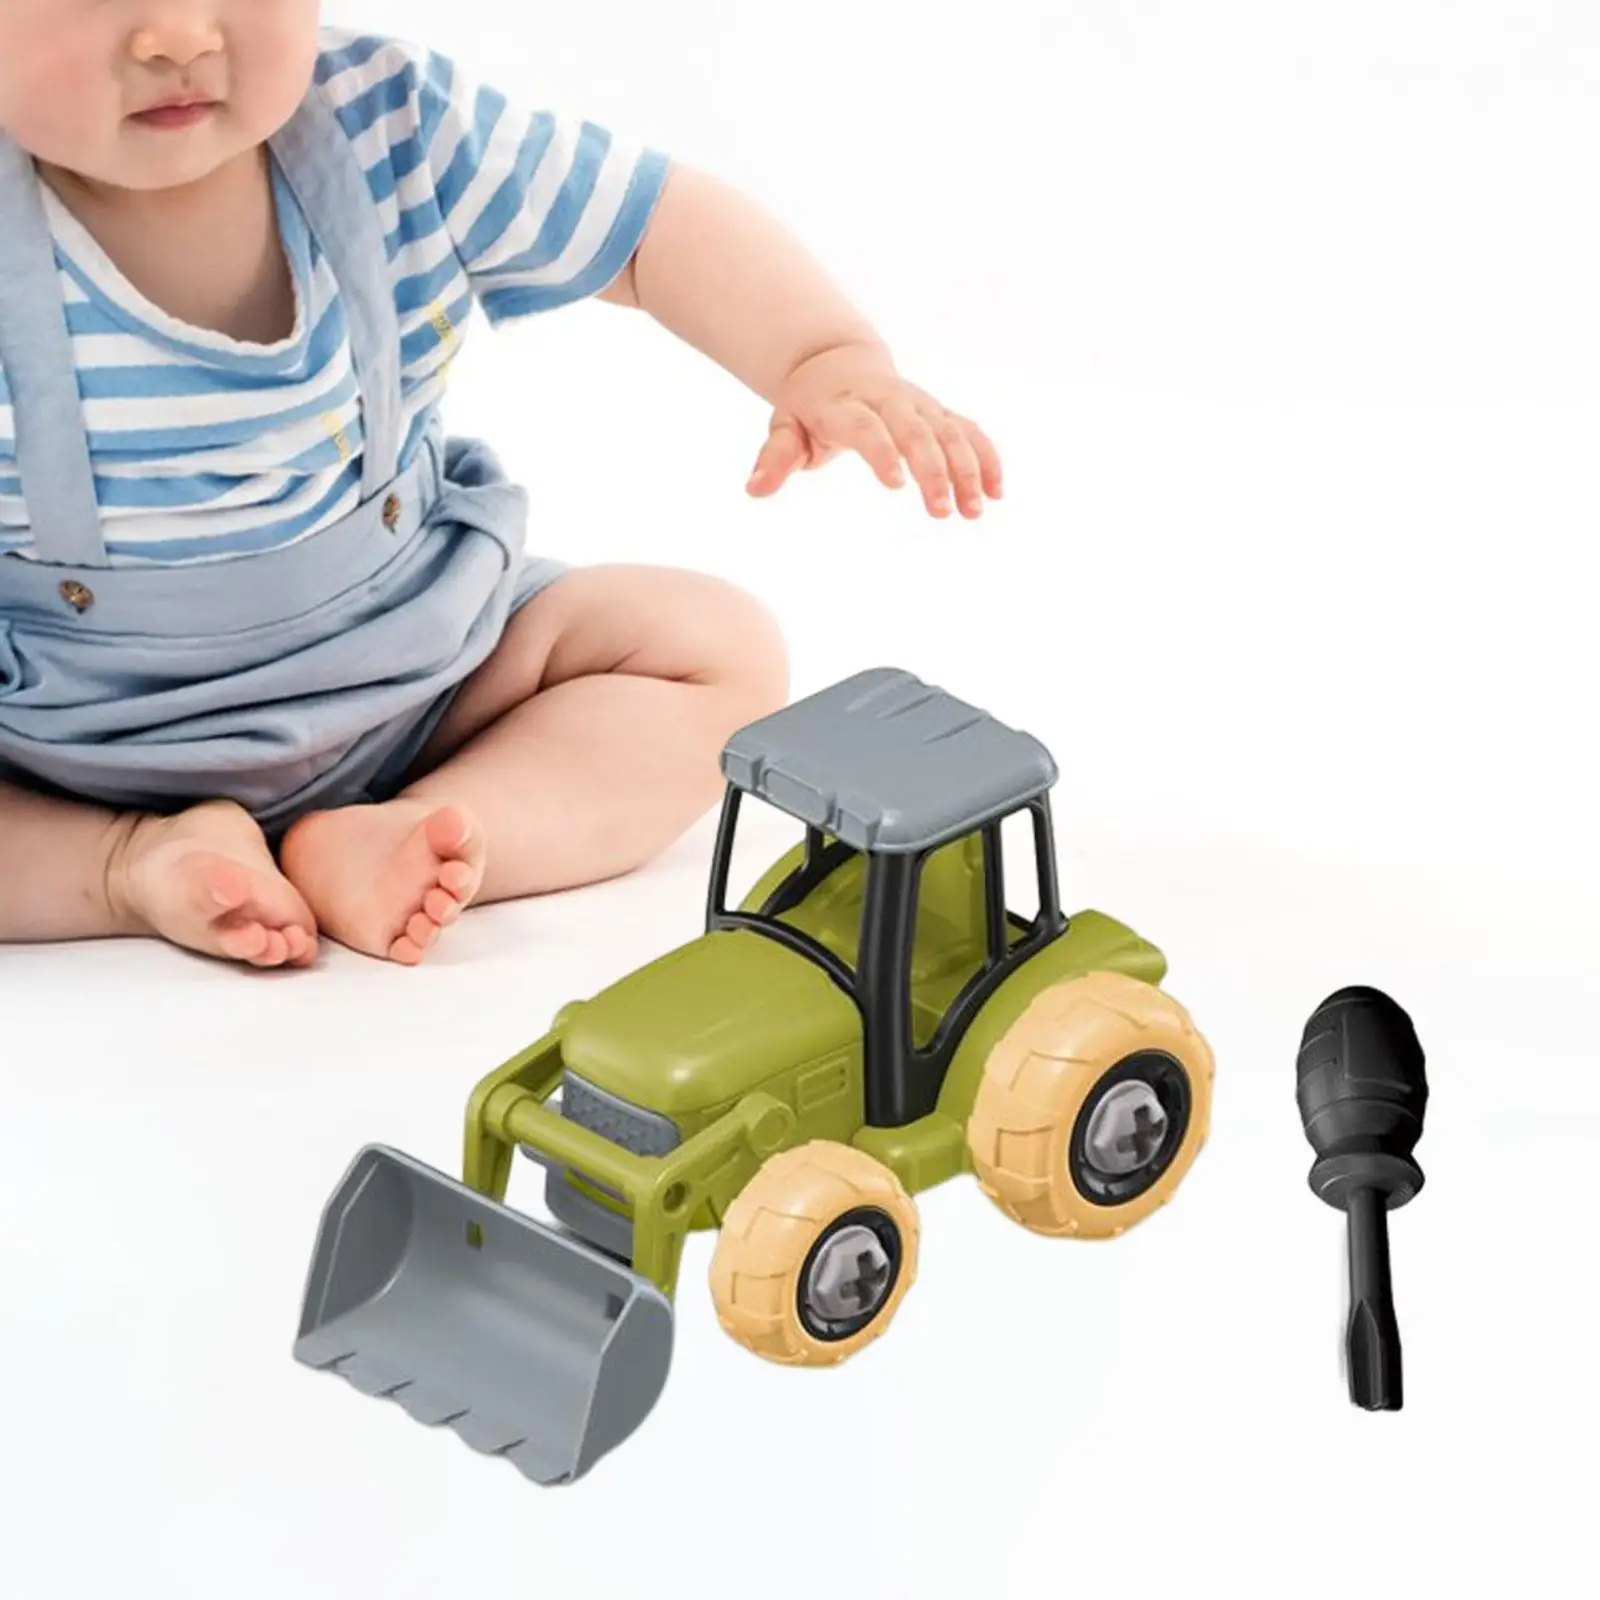 Take Apart Toy Excavator Truck DIY Educational Gifts W/ Screwdriver DIY Assemble Toys for Kids 3 4 5 6 7 Year Old Birthday Gifts